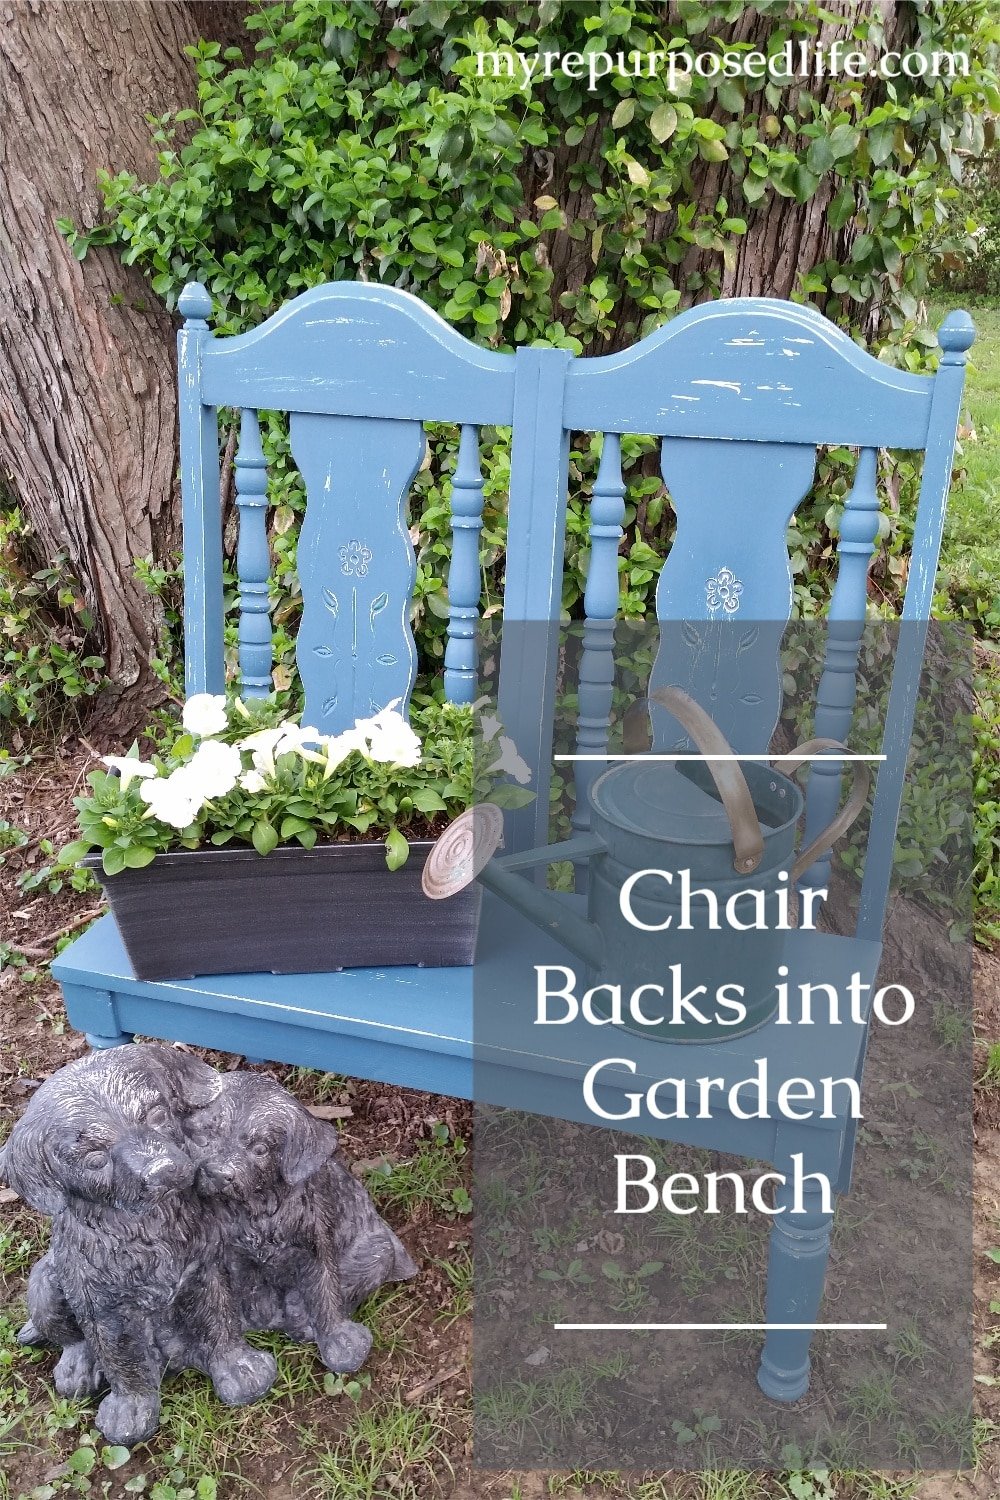 How to make a sweet garden bench from reclaimed chairs. This garden bench was changed up and I love the new look! #myrepurposedlife #repurposed #furniture #chair #garden #bench #plantstand via @repurposedlife